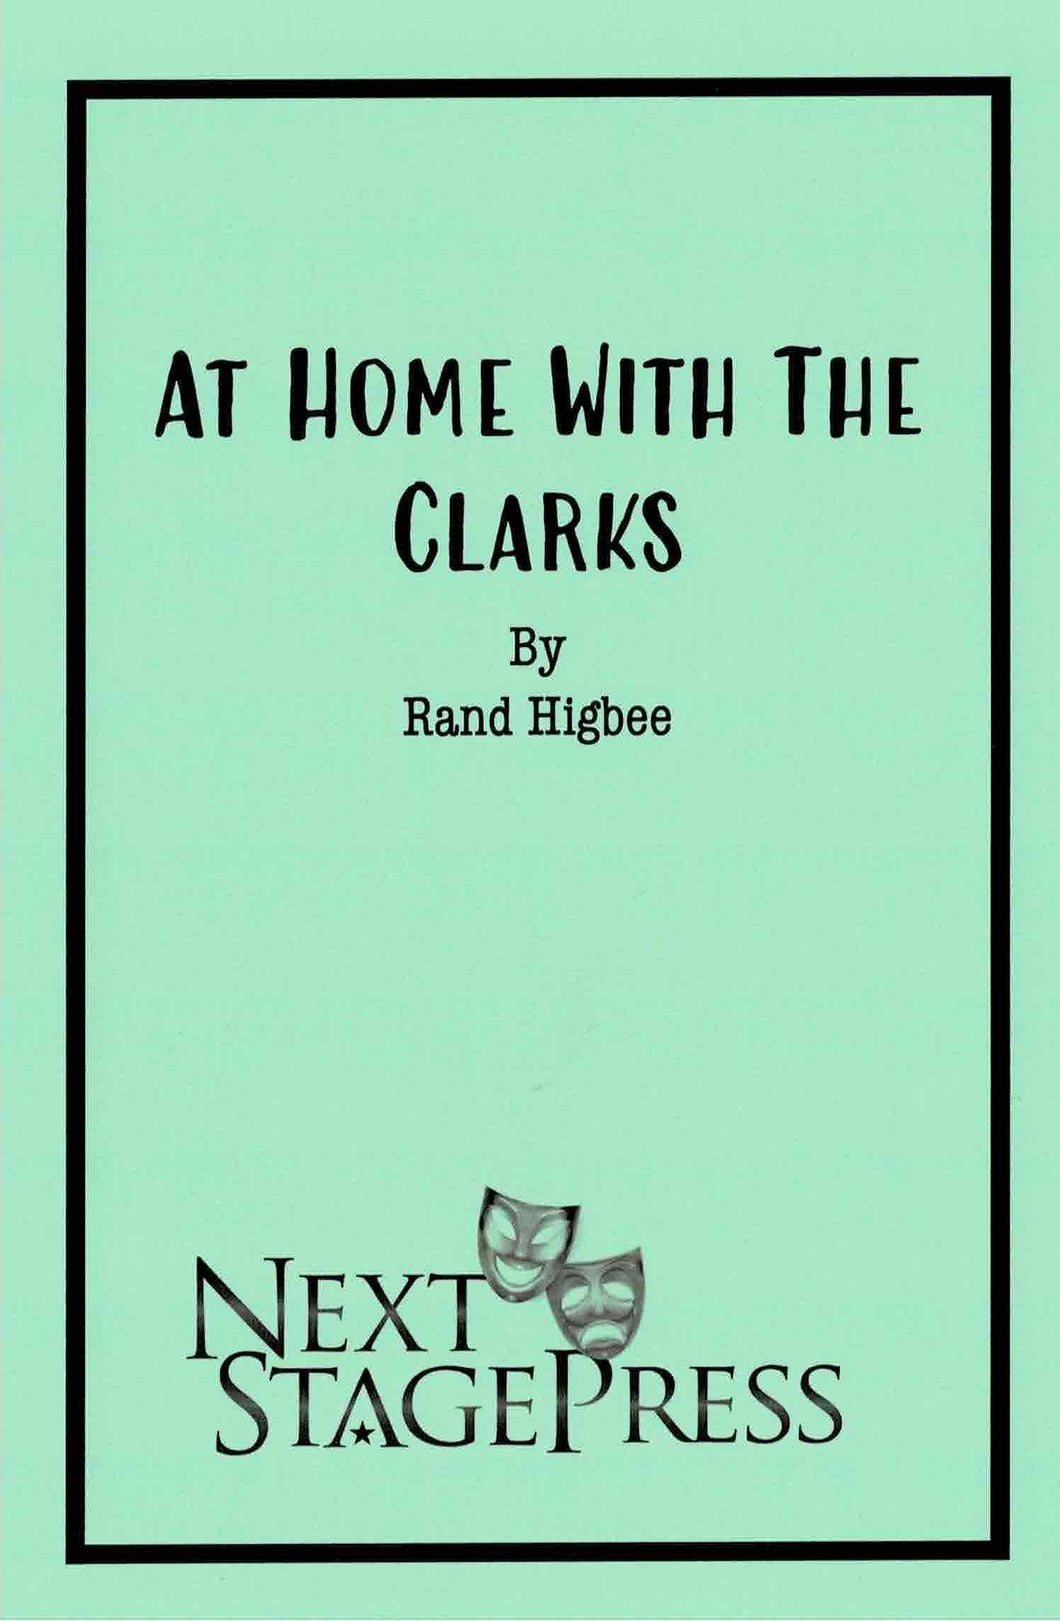 At Home With the Clarks